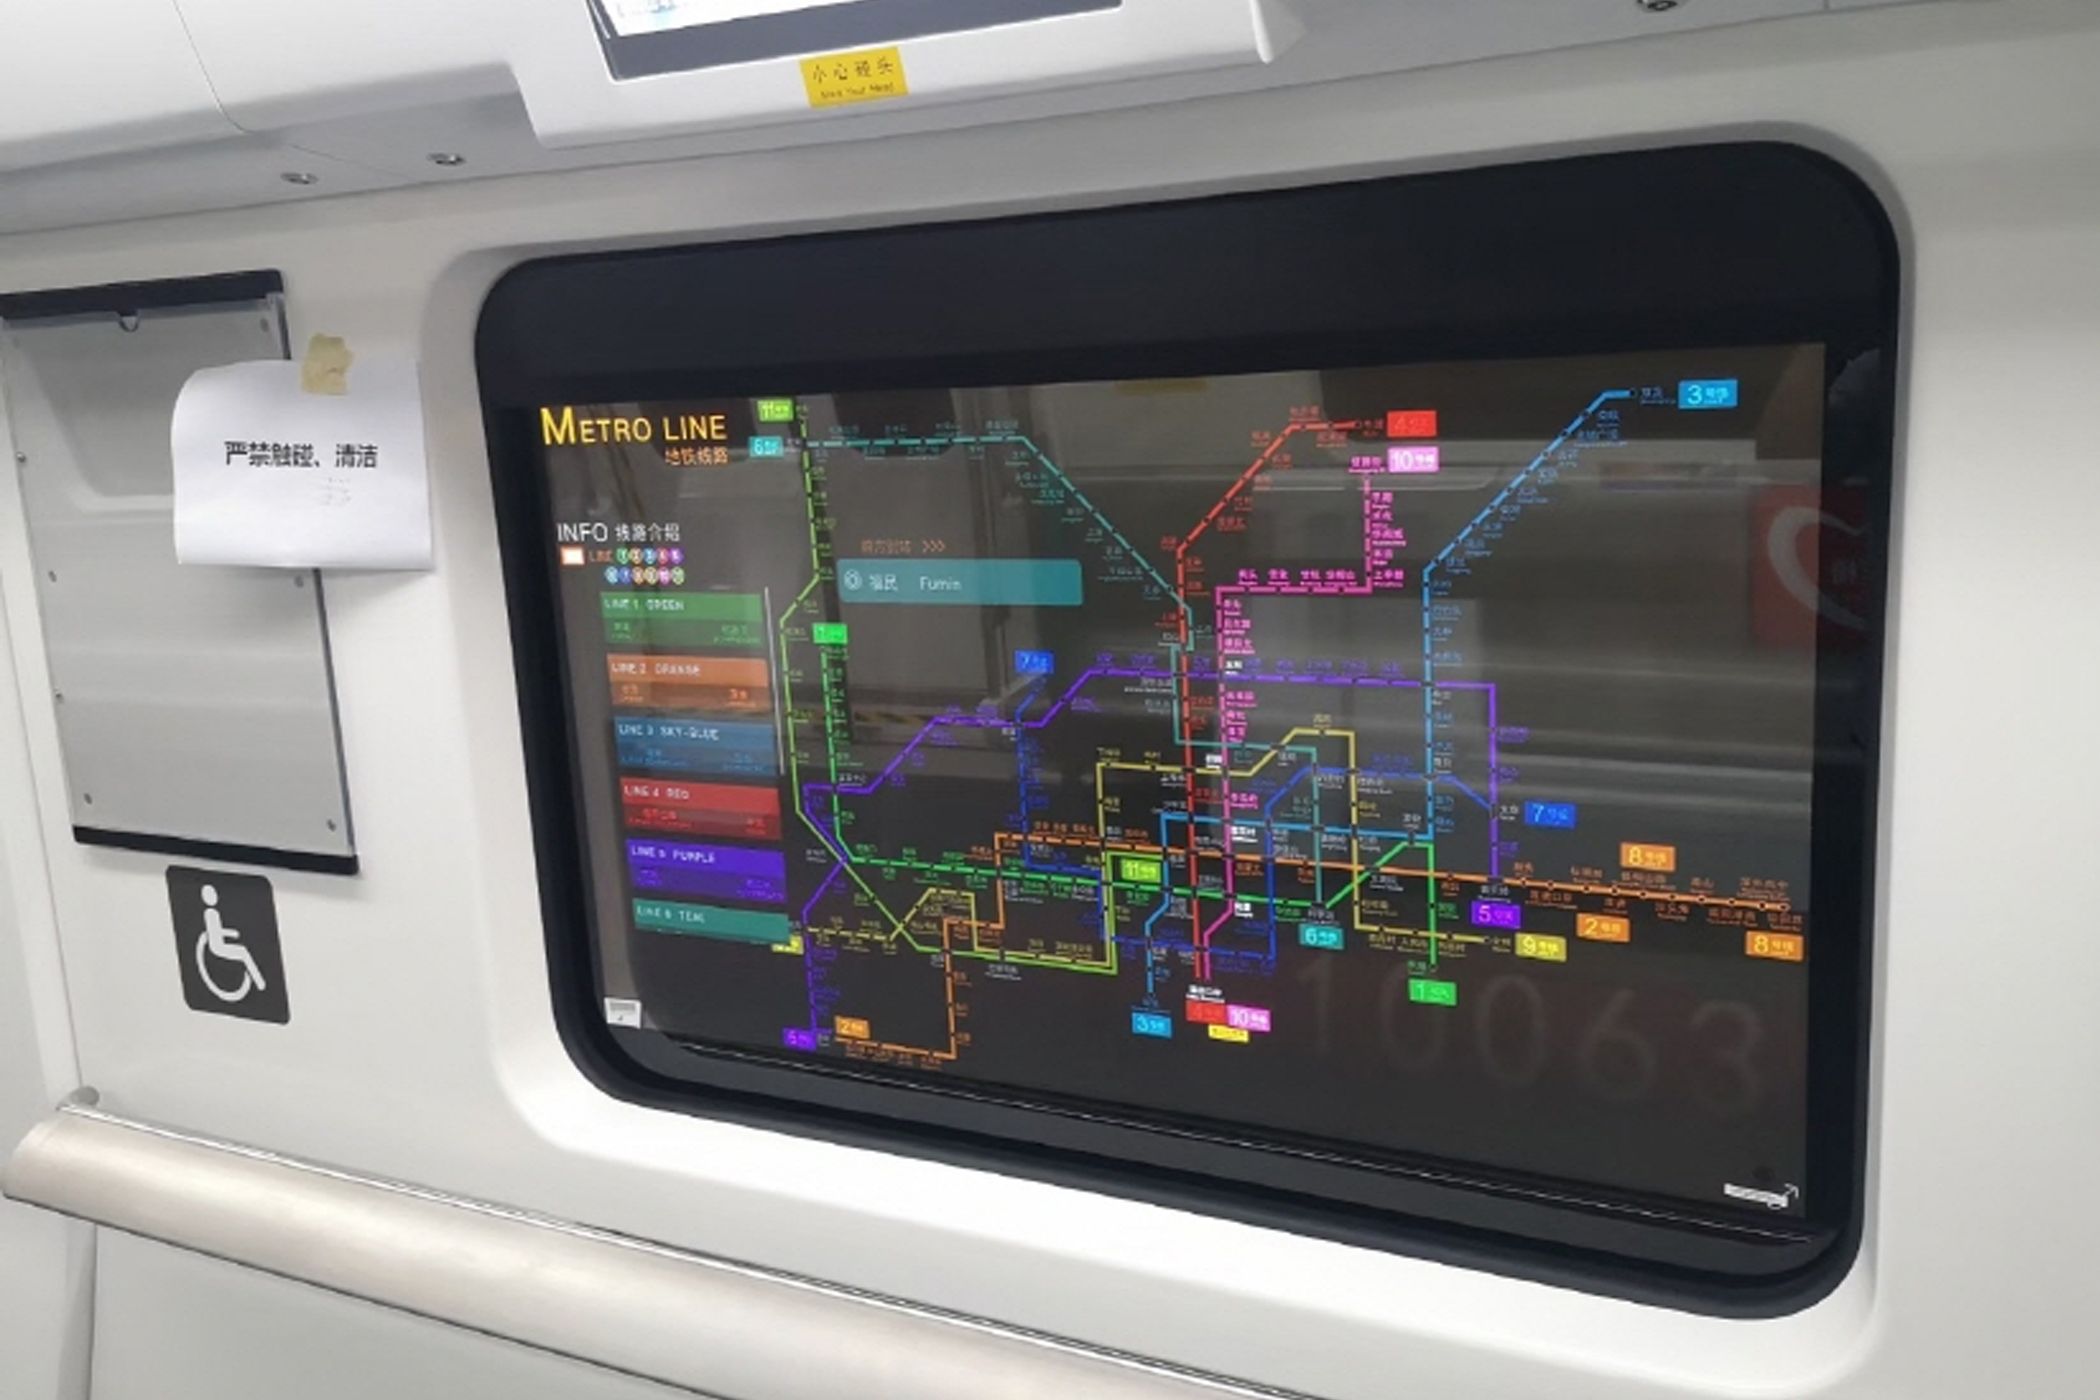 A transparent LG display in a Chinese subway.